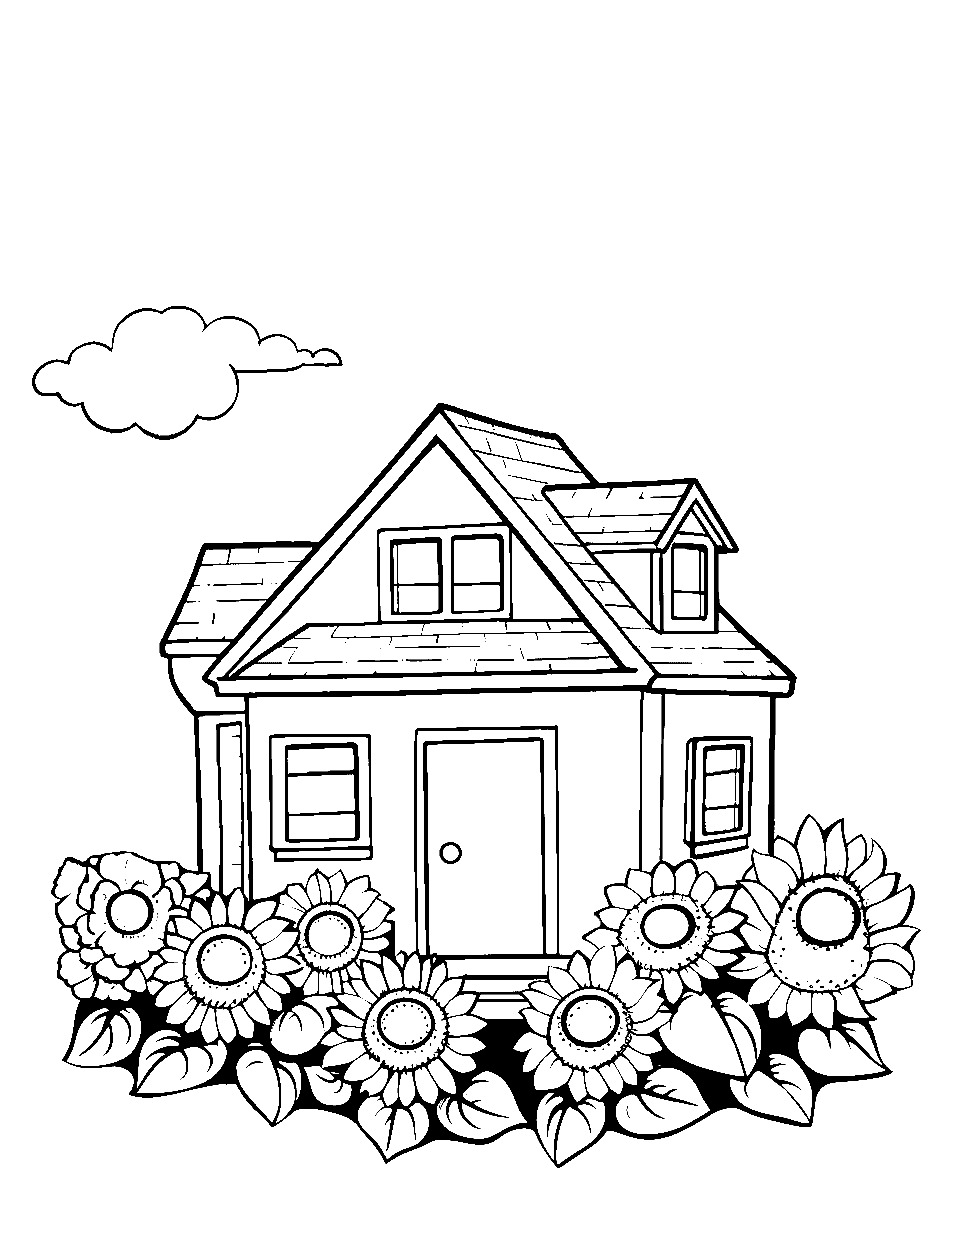 Sunny Flower House Coloring Page - A house in the middle of big blooming flowers.